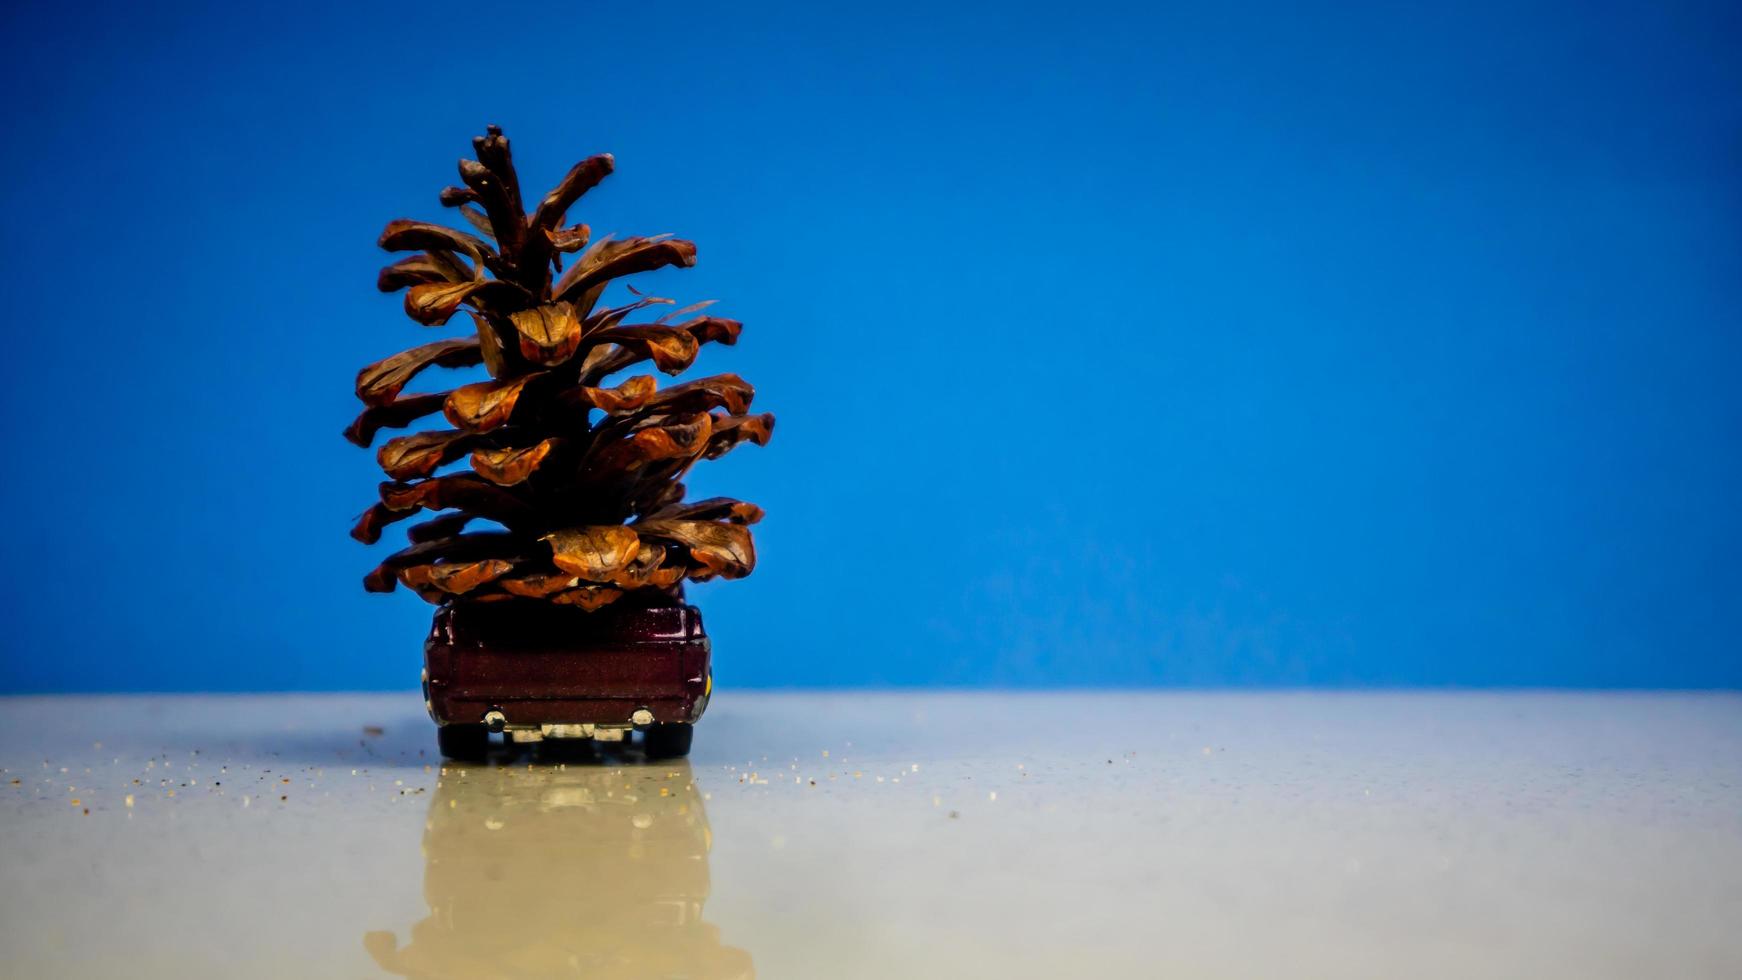 Minahasa, Indonesia  December 2022, the toy car transporting pinecones photo